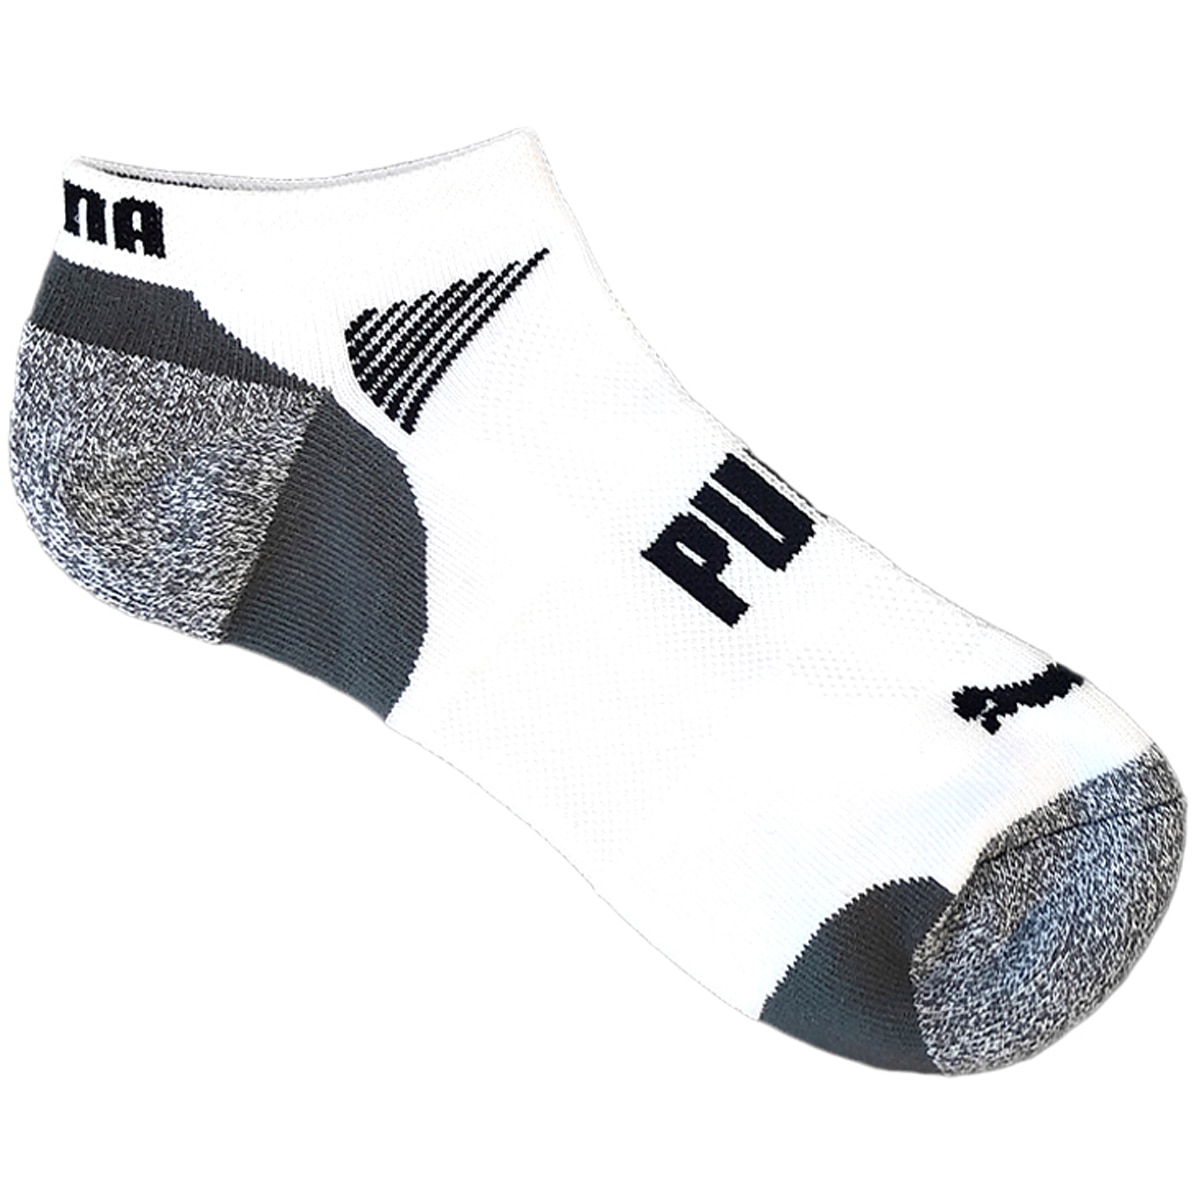 Puma Men's No Show Sock 8-Pack Only Shipped On, 48% OFF